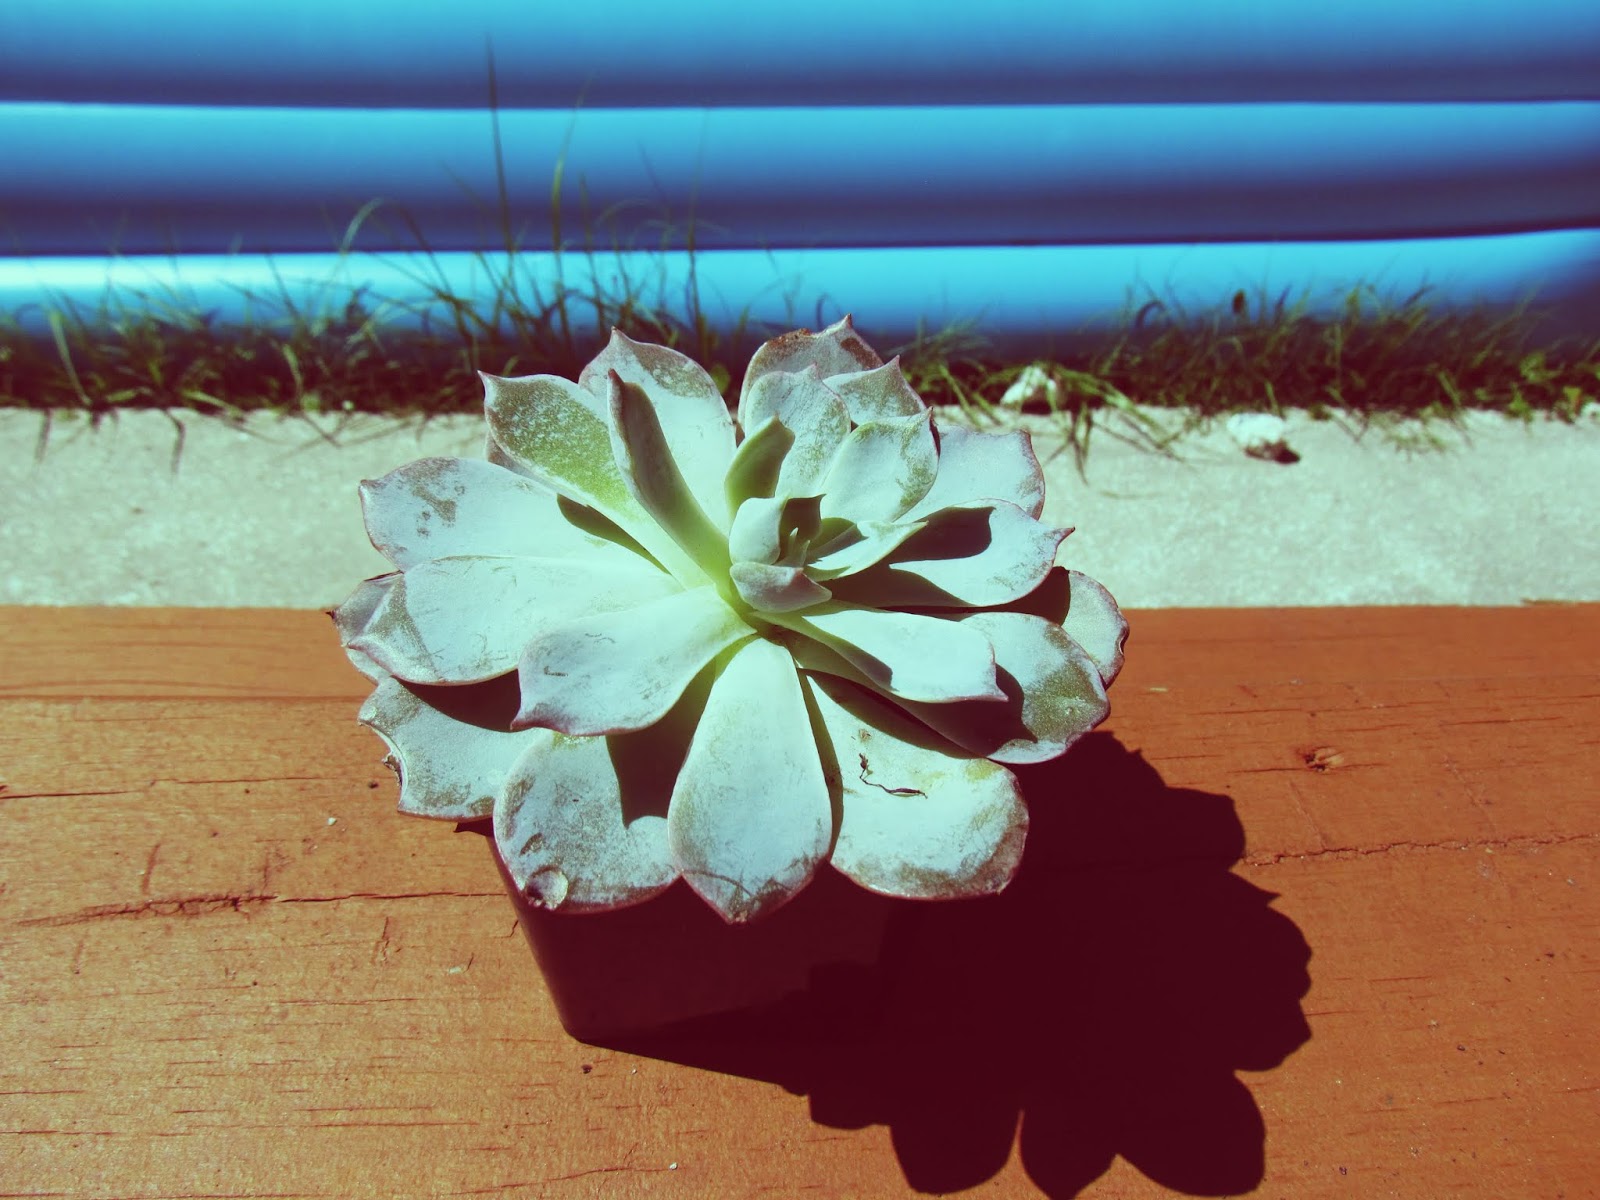 Baby Succulent in Cute Planter by the Pool in Summer